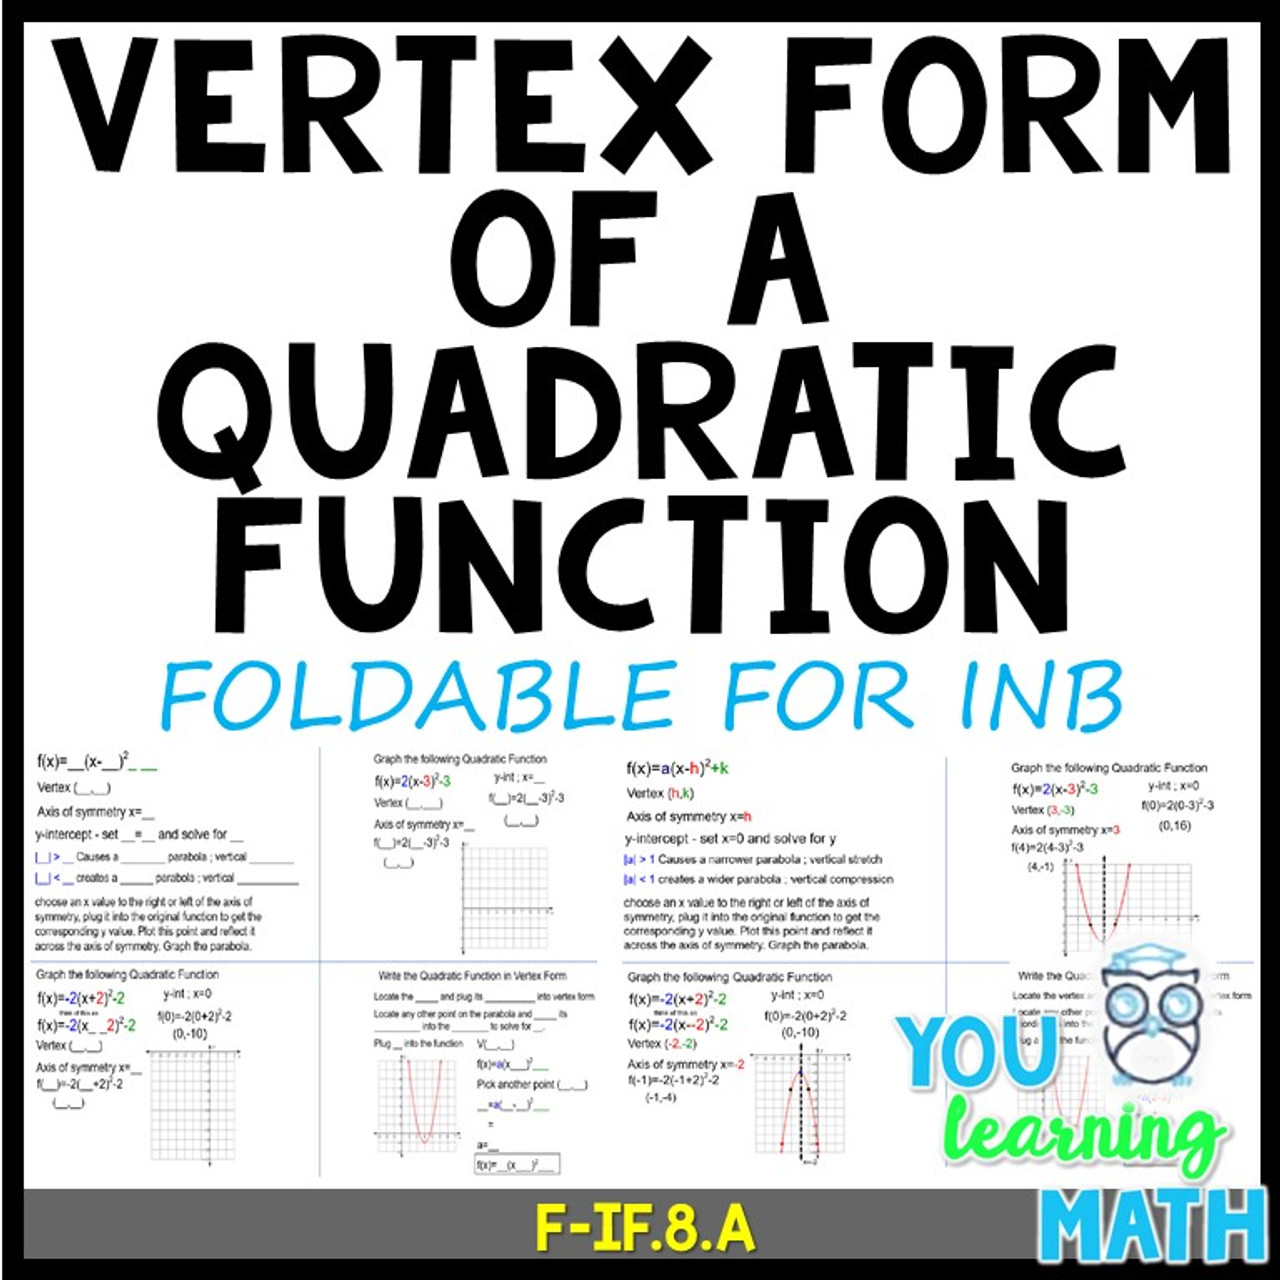 Vertex Form of a Quadratic Function - Foldable for INB with SMART Notebook File